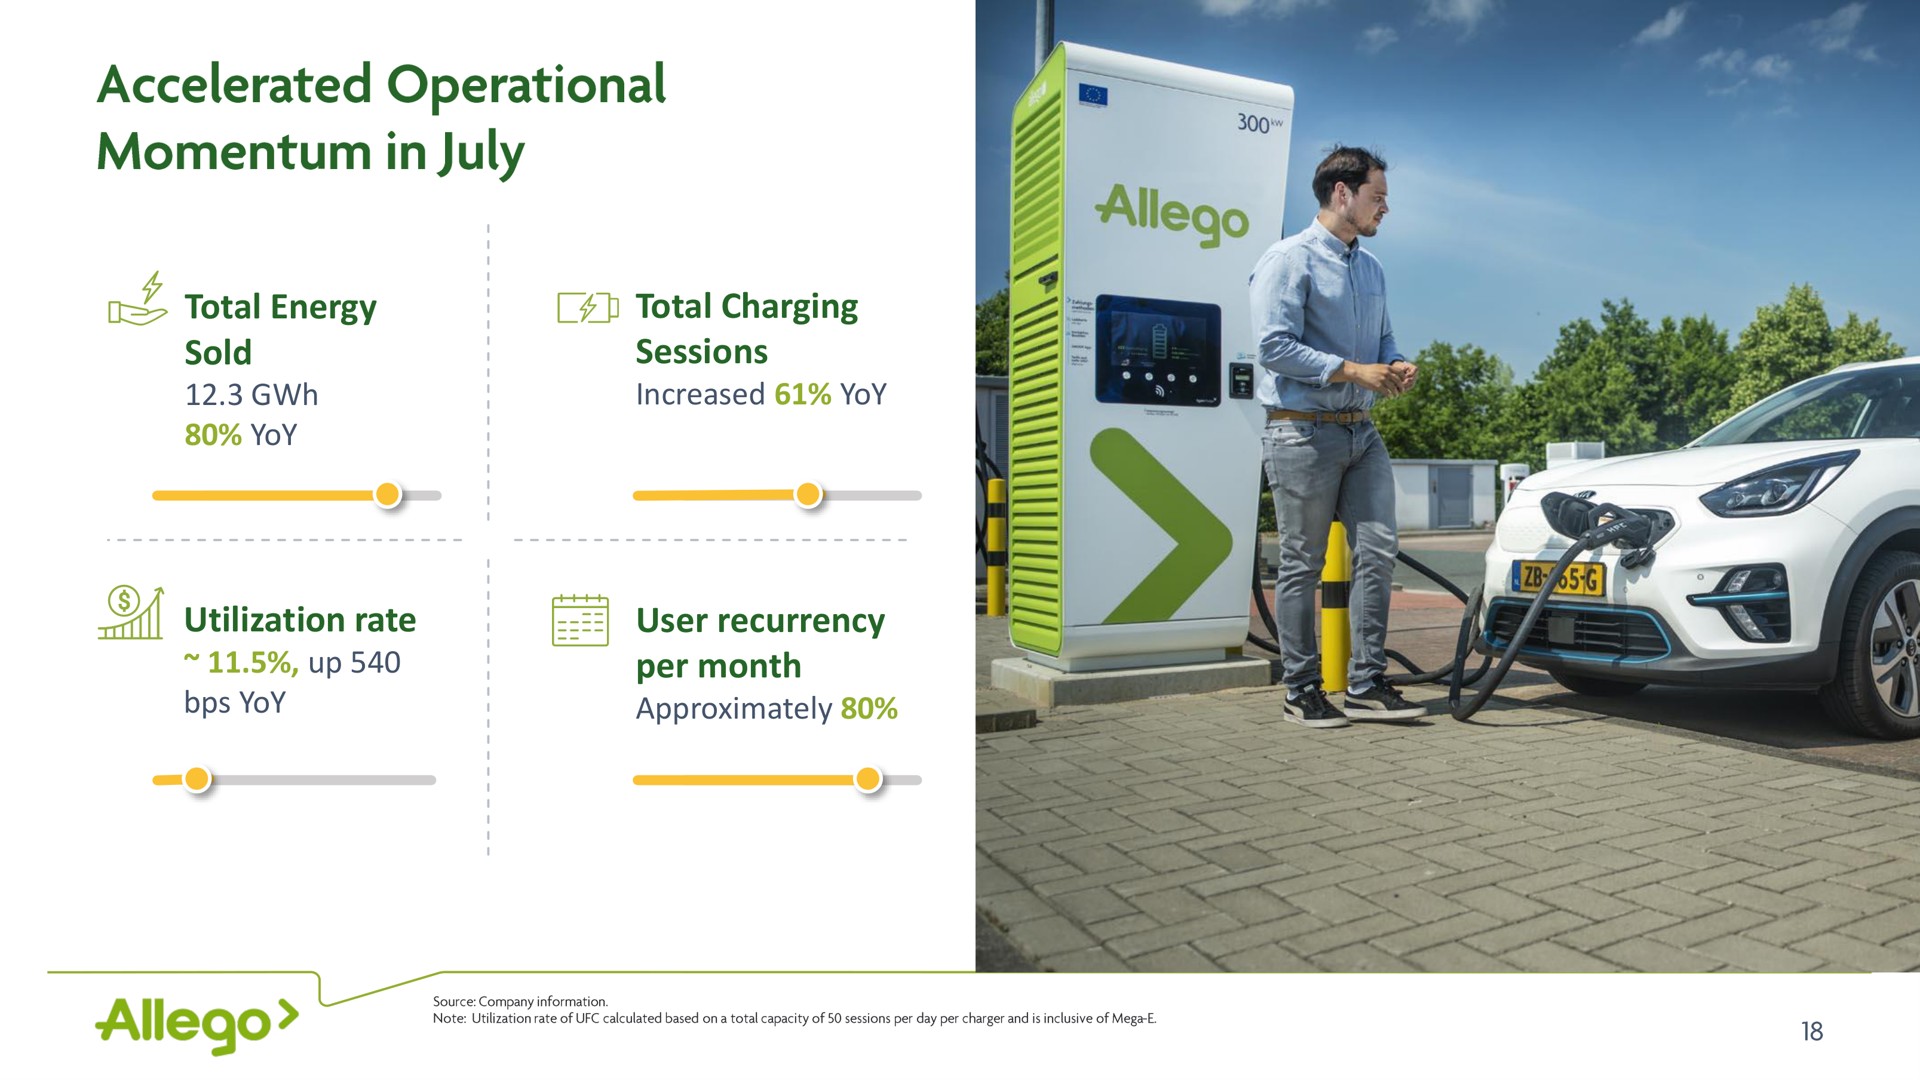 total energy sold total charging sessions utilization rate user recurrency per month accelerated operational momentum in increased yoy | Allego